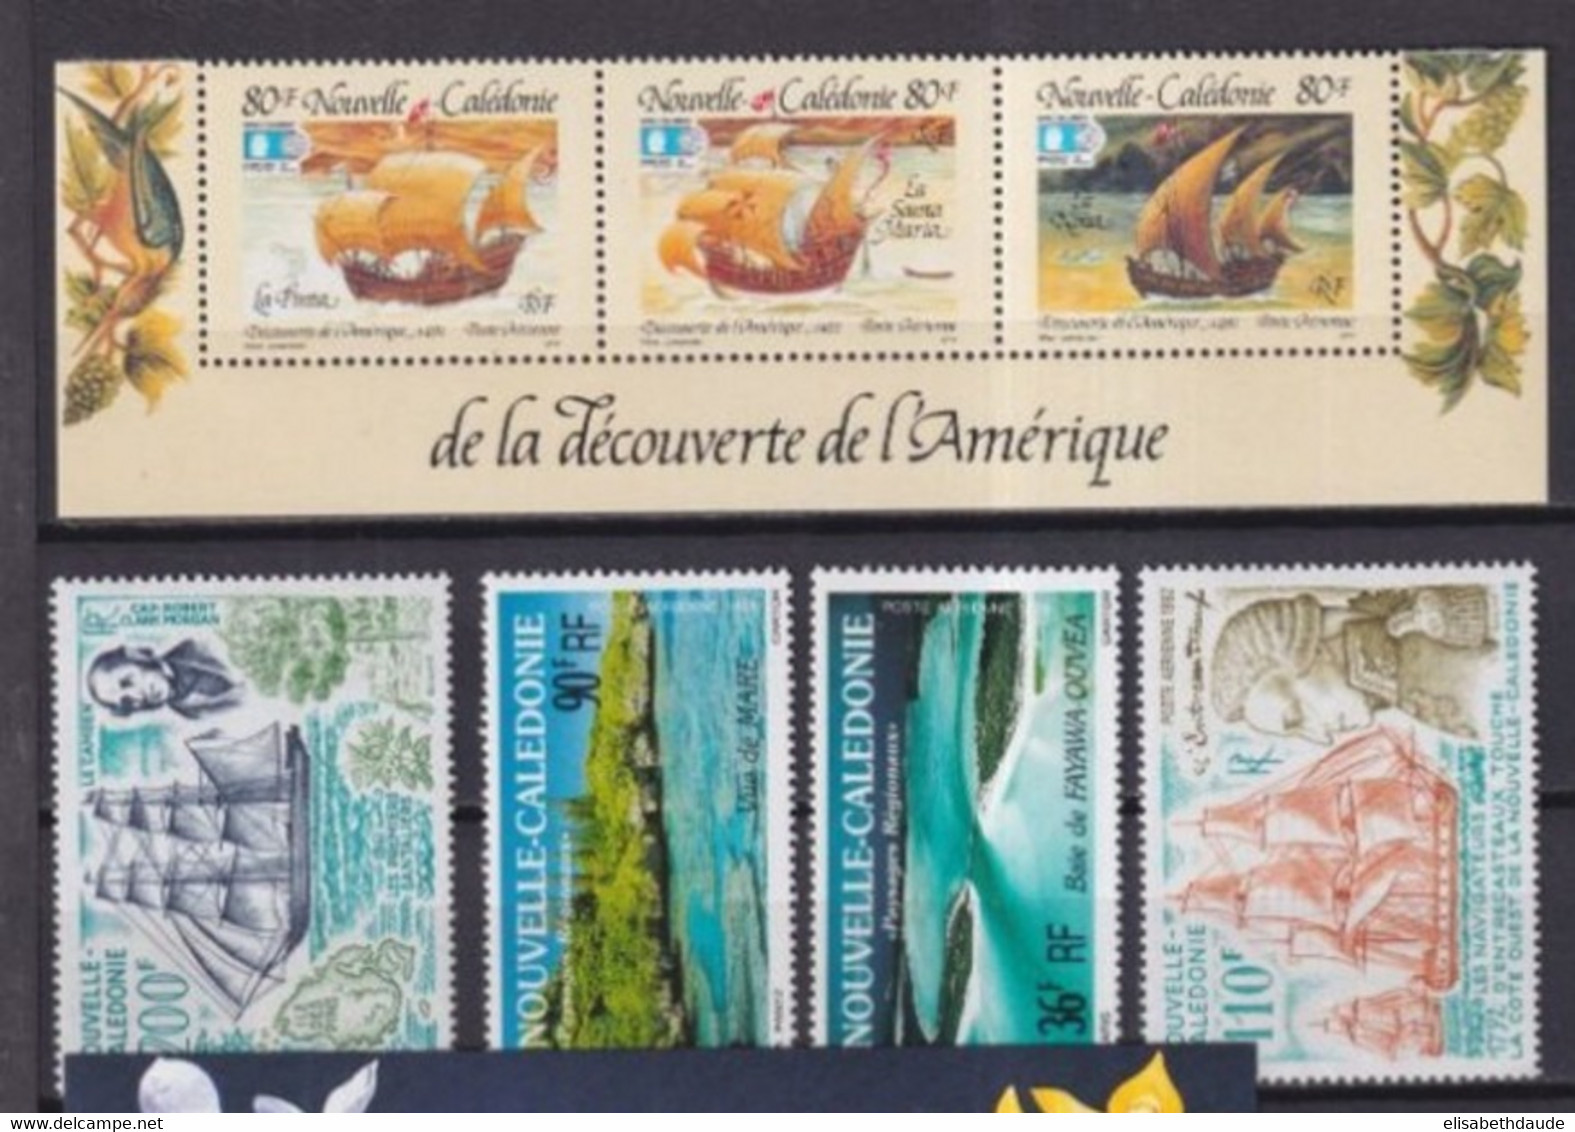 CALEDONIE - 1990/92 - COLLECTION 2 PAGES ! ** MNH - COTE YVERT 2017 = 106.1 EUR - Unused Stamps